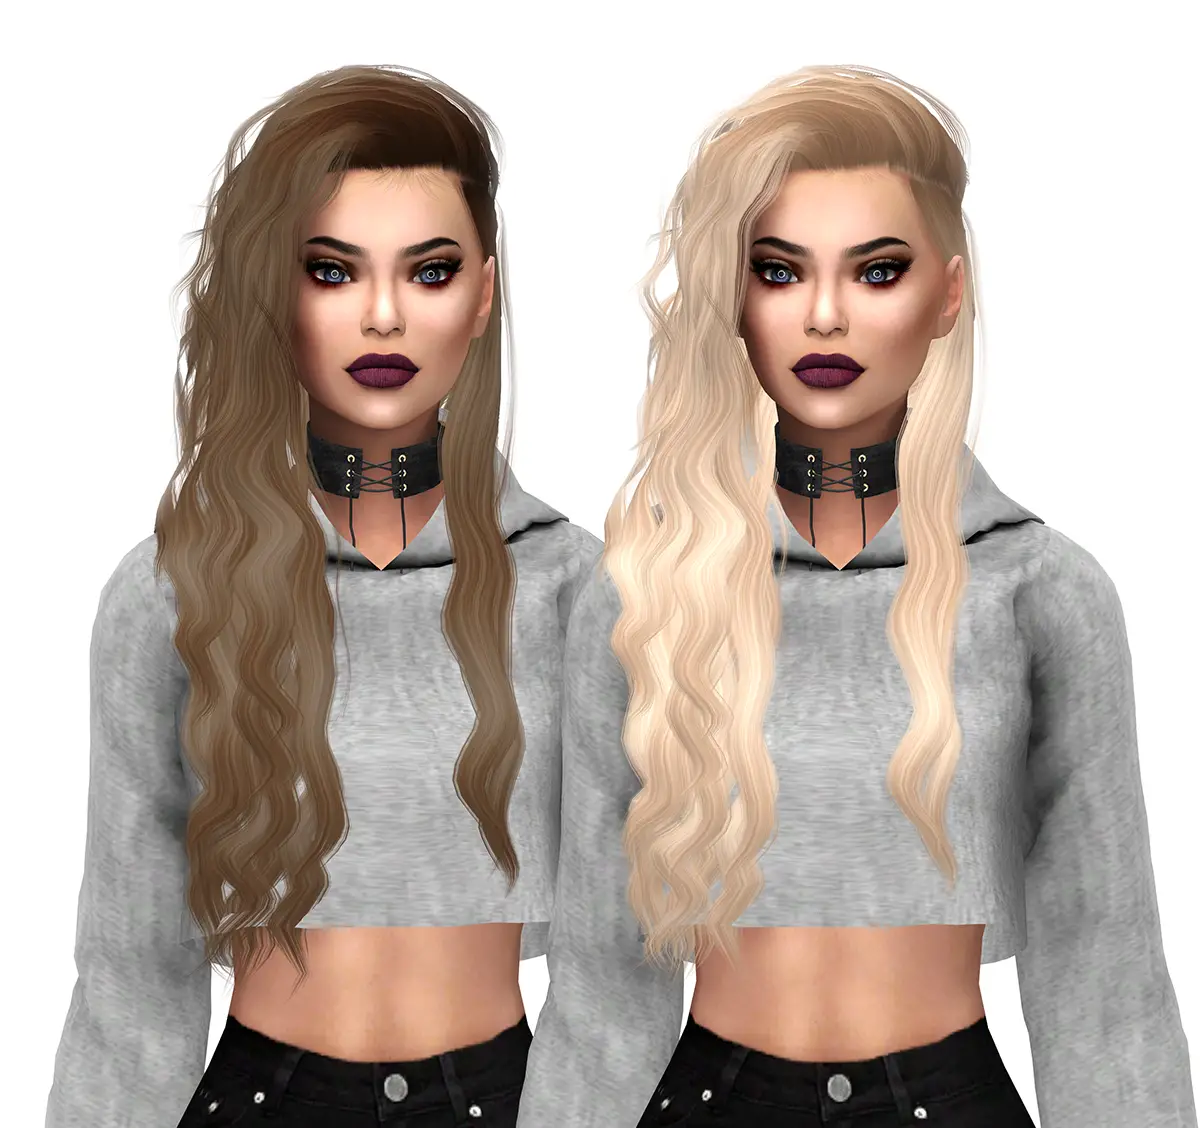 Sims 4 Hairs ~ Frost Sims 4: Simpliciaty`s Alessia hair 